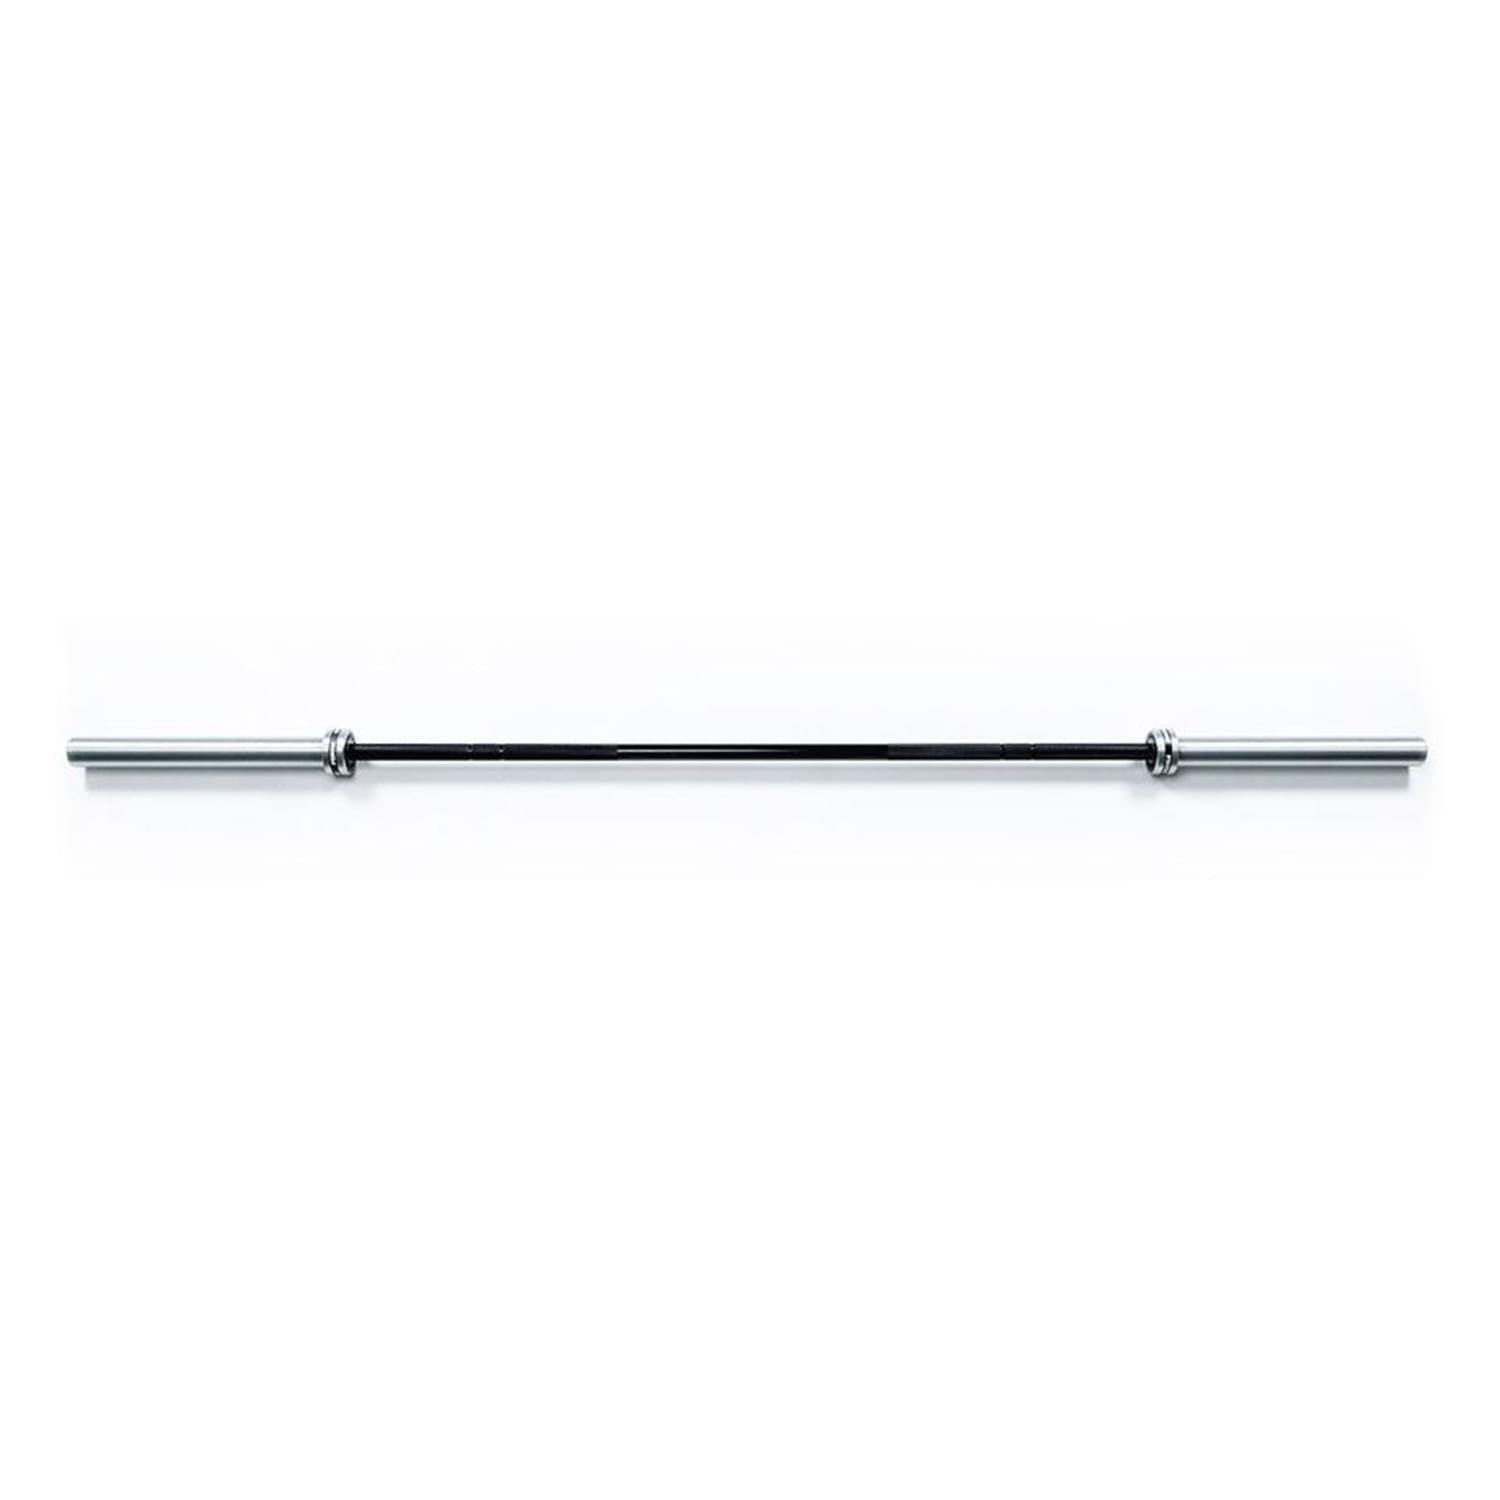 Force USA Patriot Barbell, 20 kg, 86 Inch